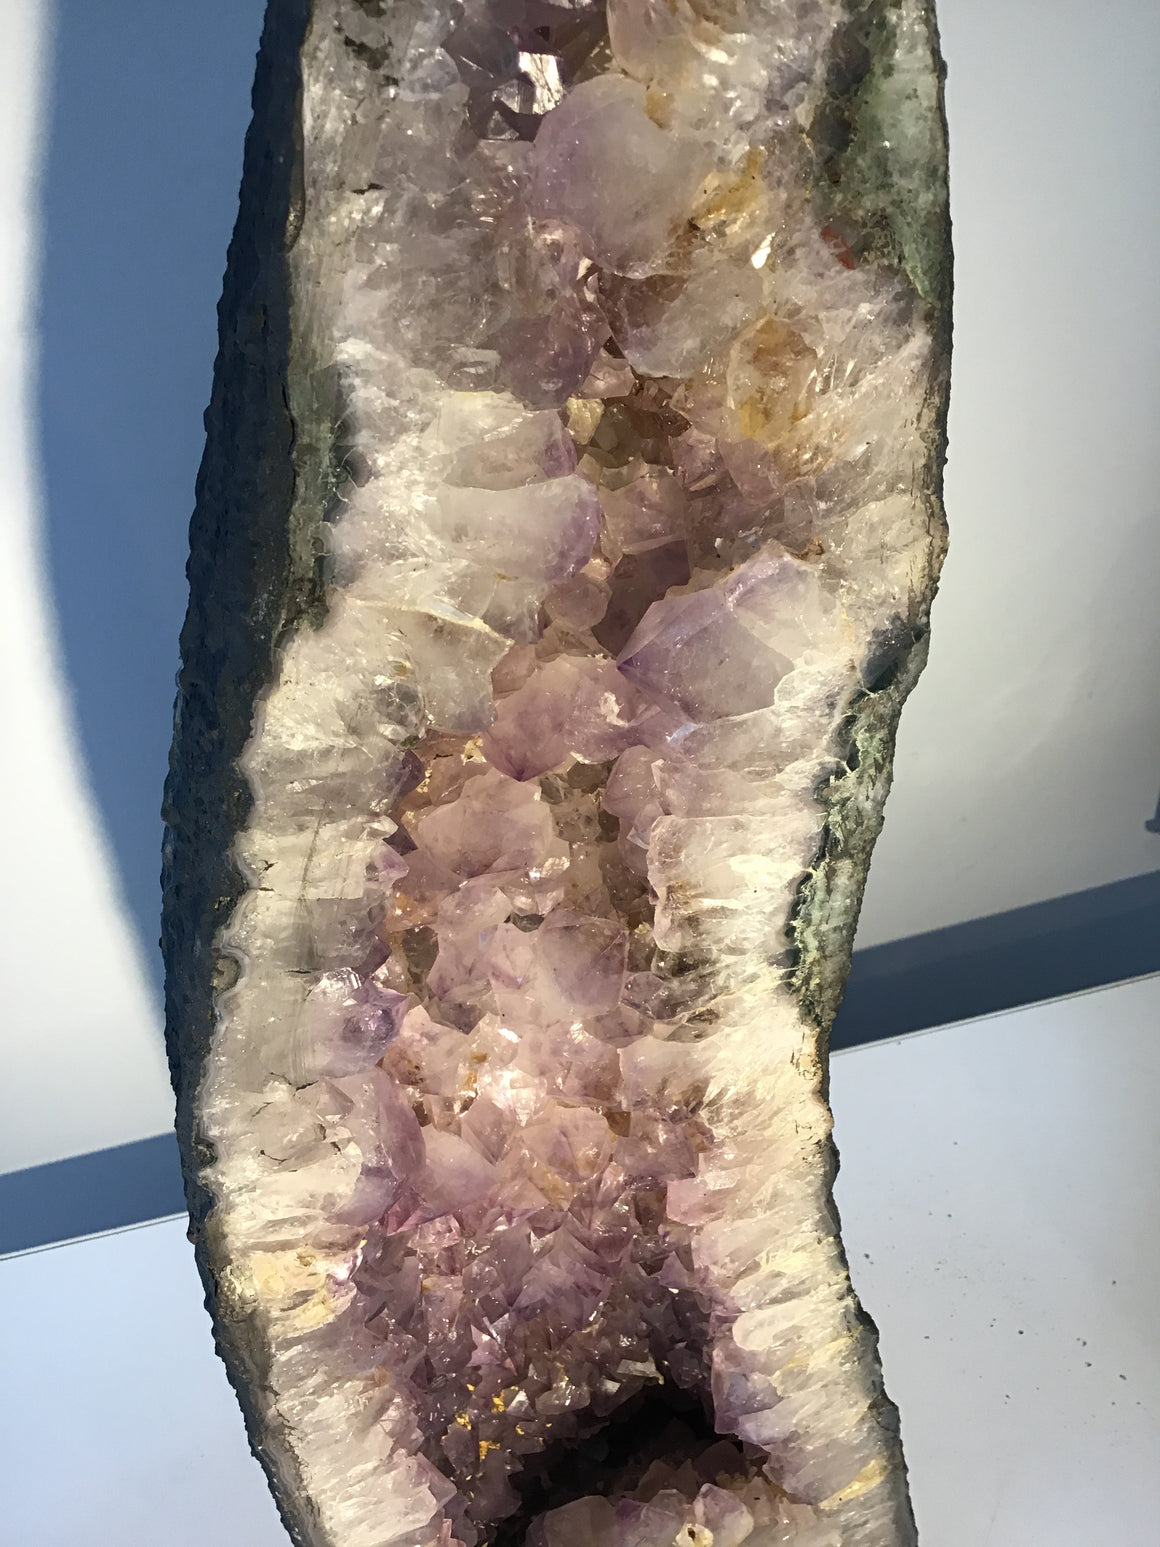 Stunning 24 Inch Tall AMETHYST TOWER - (11) with Citrine